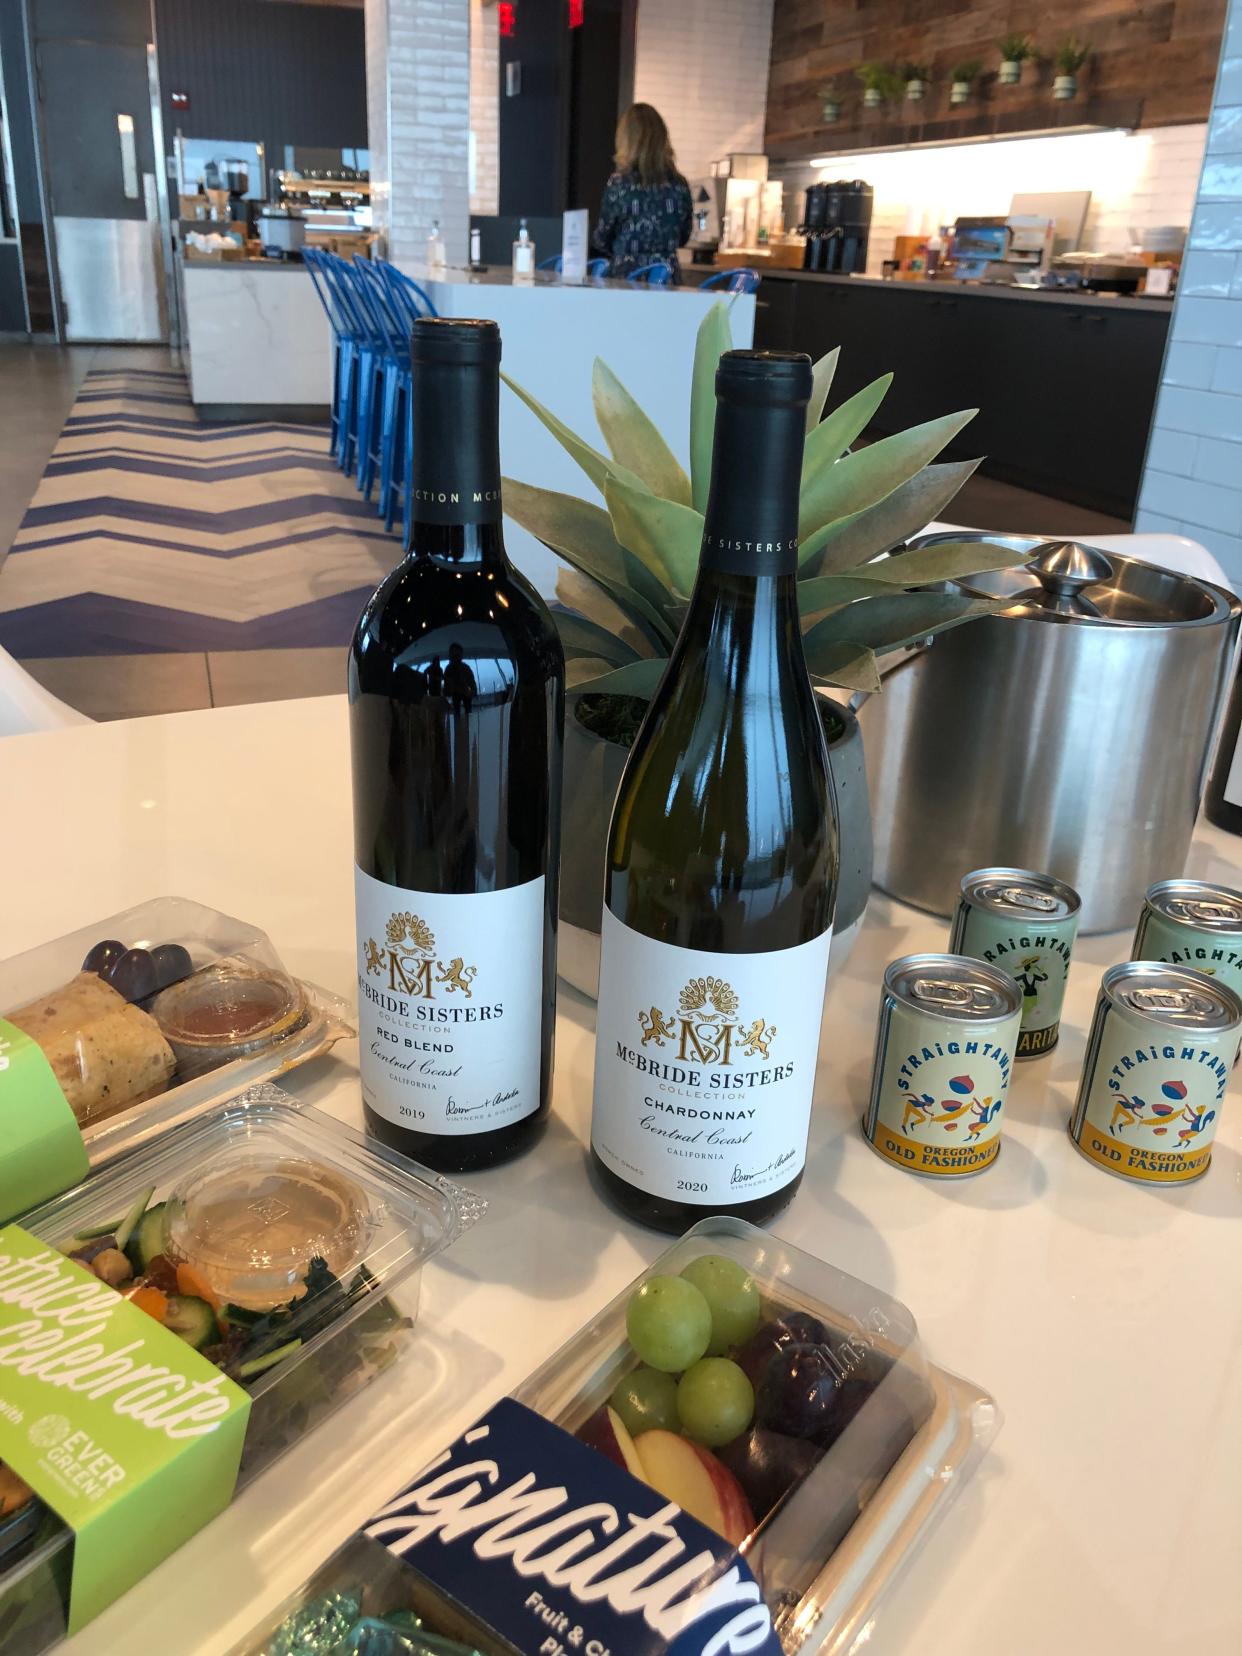 New wine and cocktail options from Alaska Airlines.